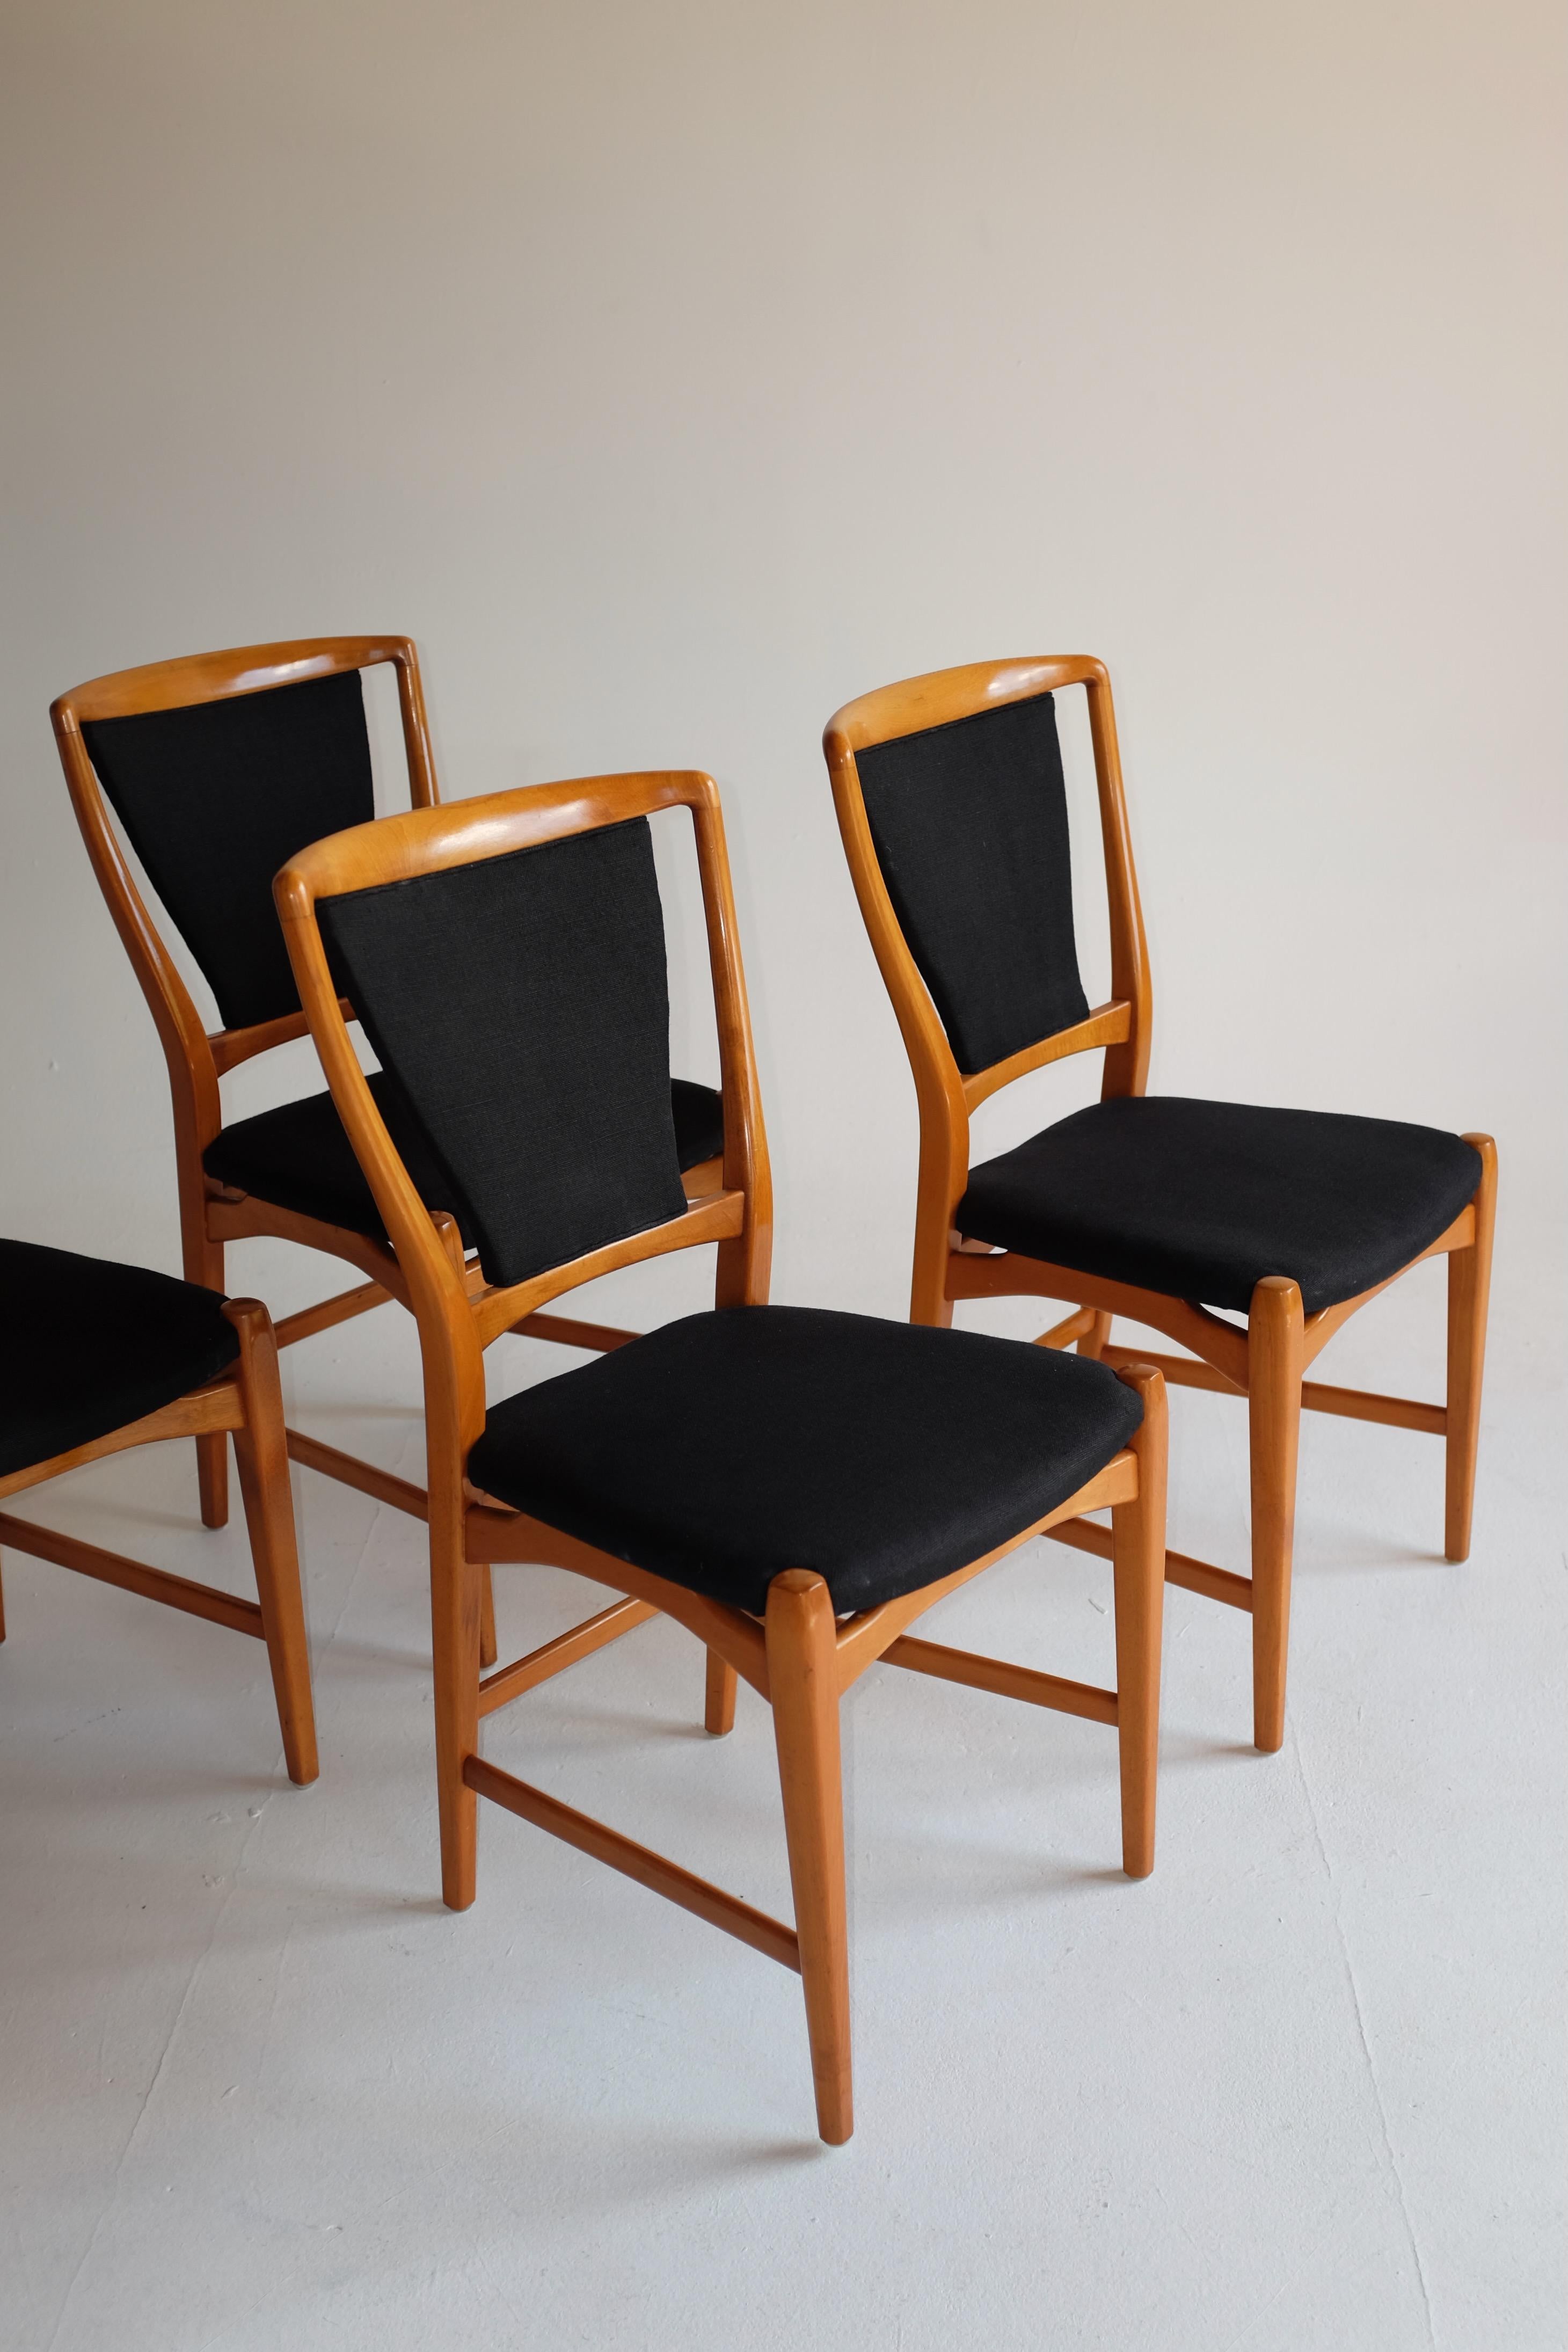 1950s Set of 4 dining chairs by Westbergs Möbler, Sweden. Beautiful curved and elegant design with a contrast black linen upholstery. The wooden frame has been restored but show some signs of wear (please see photos) as does the black